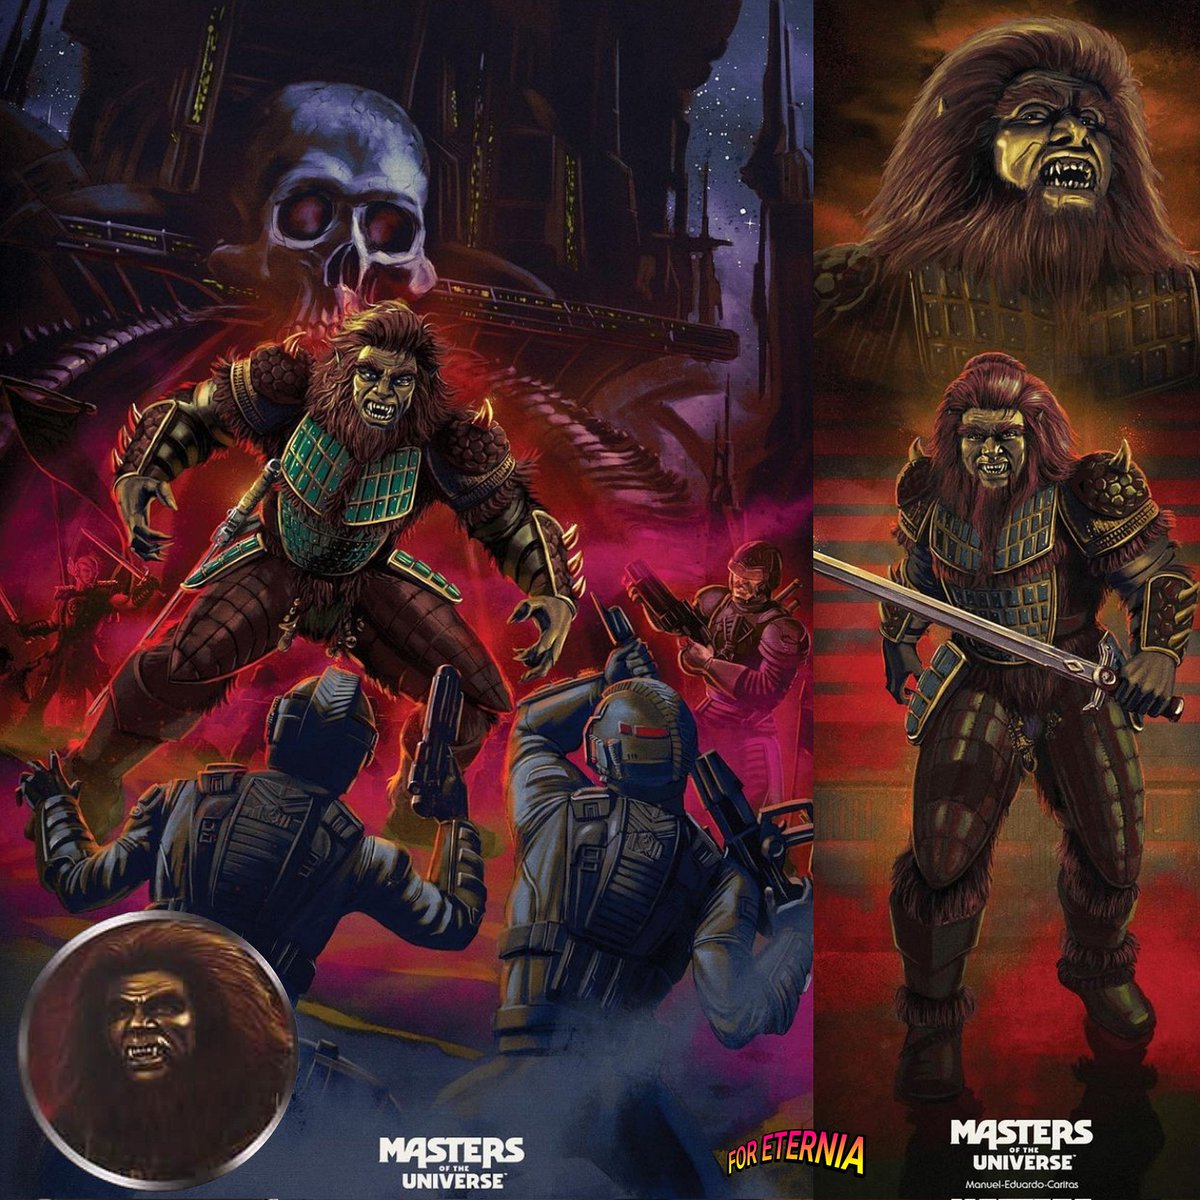 A better look at the packaging artwork for the upcoming Masterverse 'Masters of the Universe' (1987) Live-Action Film BEAST MAN figure by artist Eamon O'Donoghue (@Eamon_ ) 🎨 and courtesy of packaging designer Roy Juarez.
#MastersoftheUniverse #Motu #Masterverse #MotuMovie